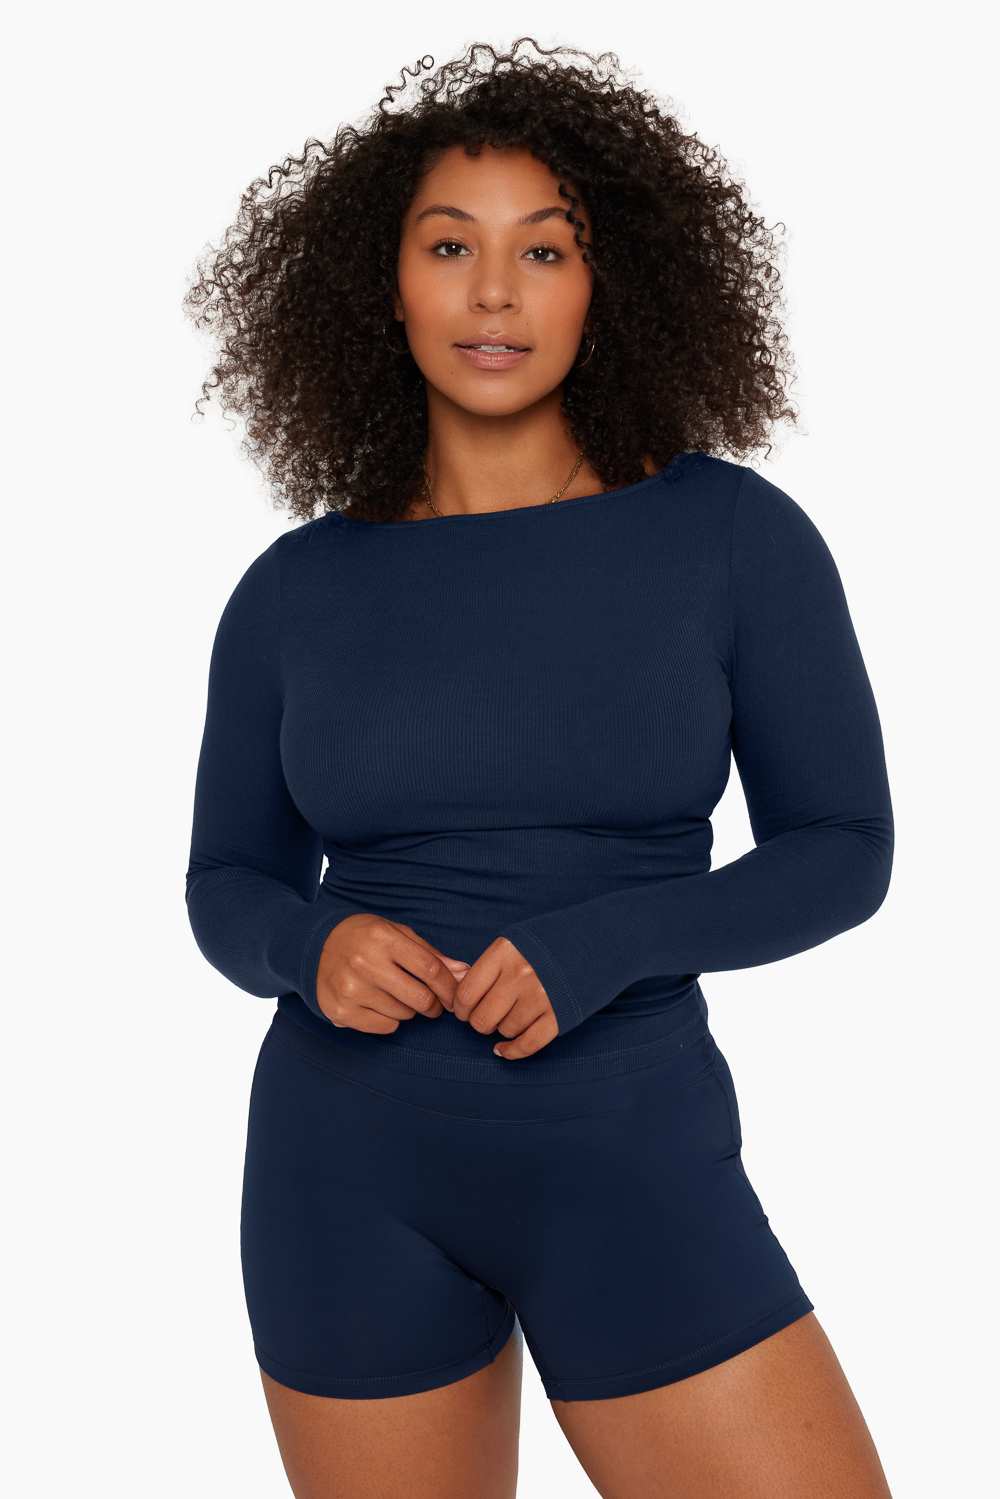 SET™ BOAT NECK LONG SLEEVE IN EMPIRE